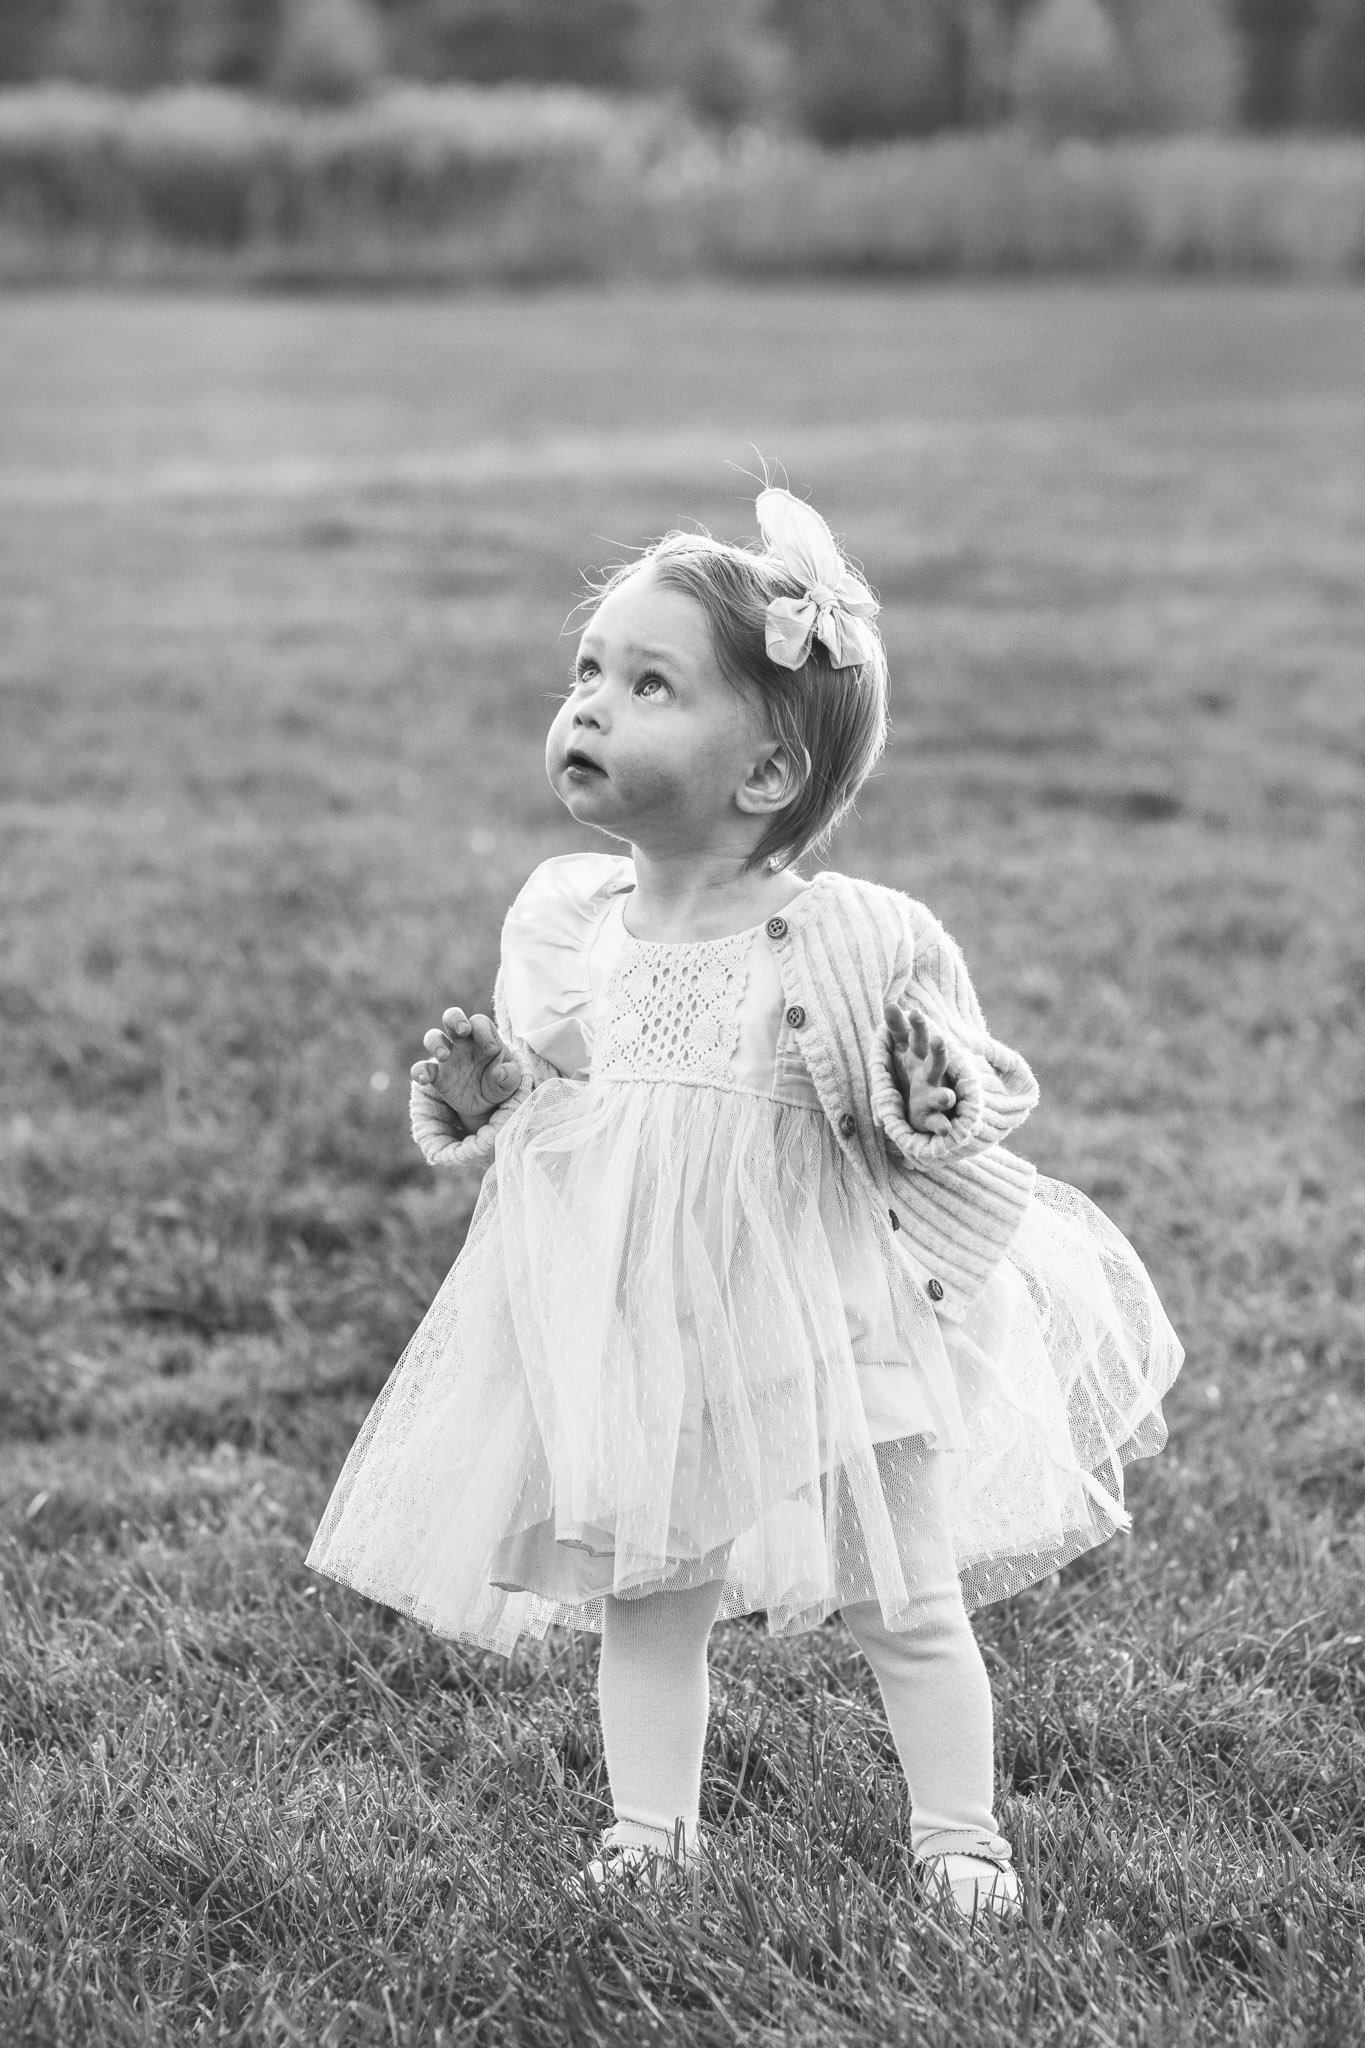  NJ family photographer Nicole Hawkins Photography captures a portrait of a little girl walking around looking up. black and white portrait of a little girl with tights and gold shoes #NicoleHawkinsPhotography #NicoleHawkinsFamilies #FallFamilyPhotos